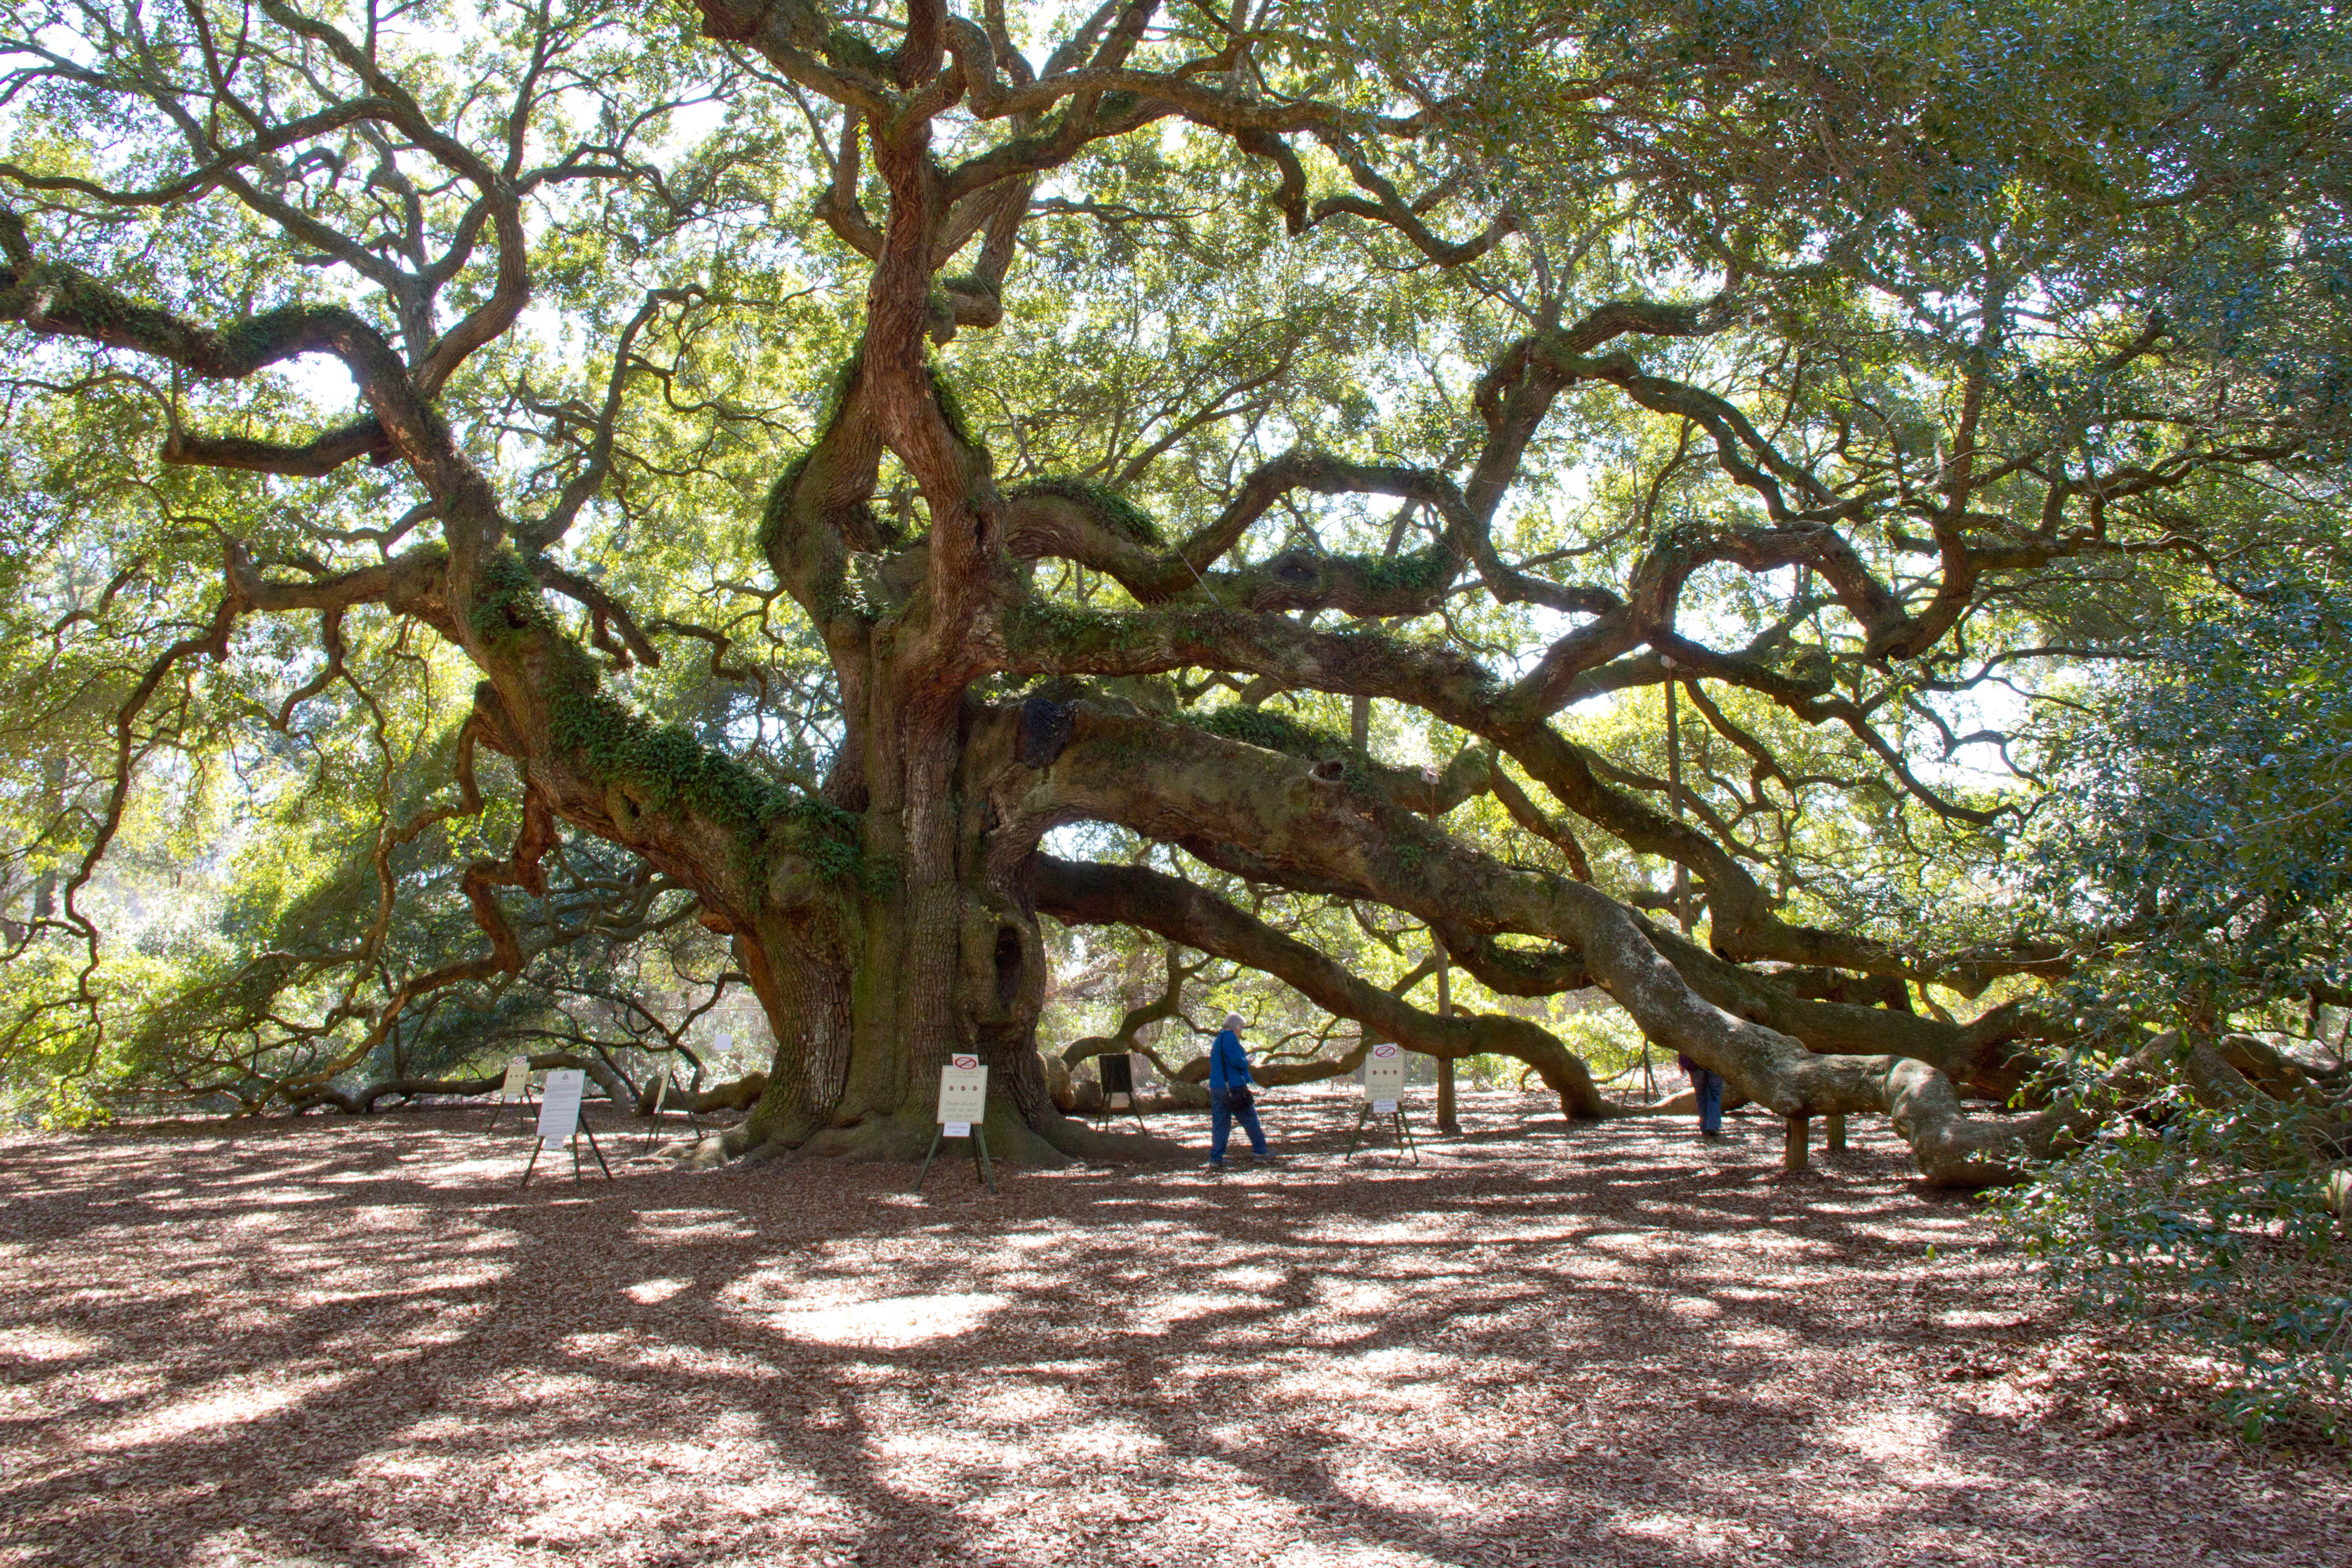 The Angel Oak is named after a family, 